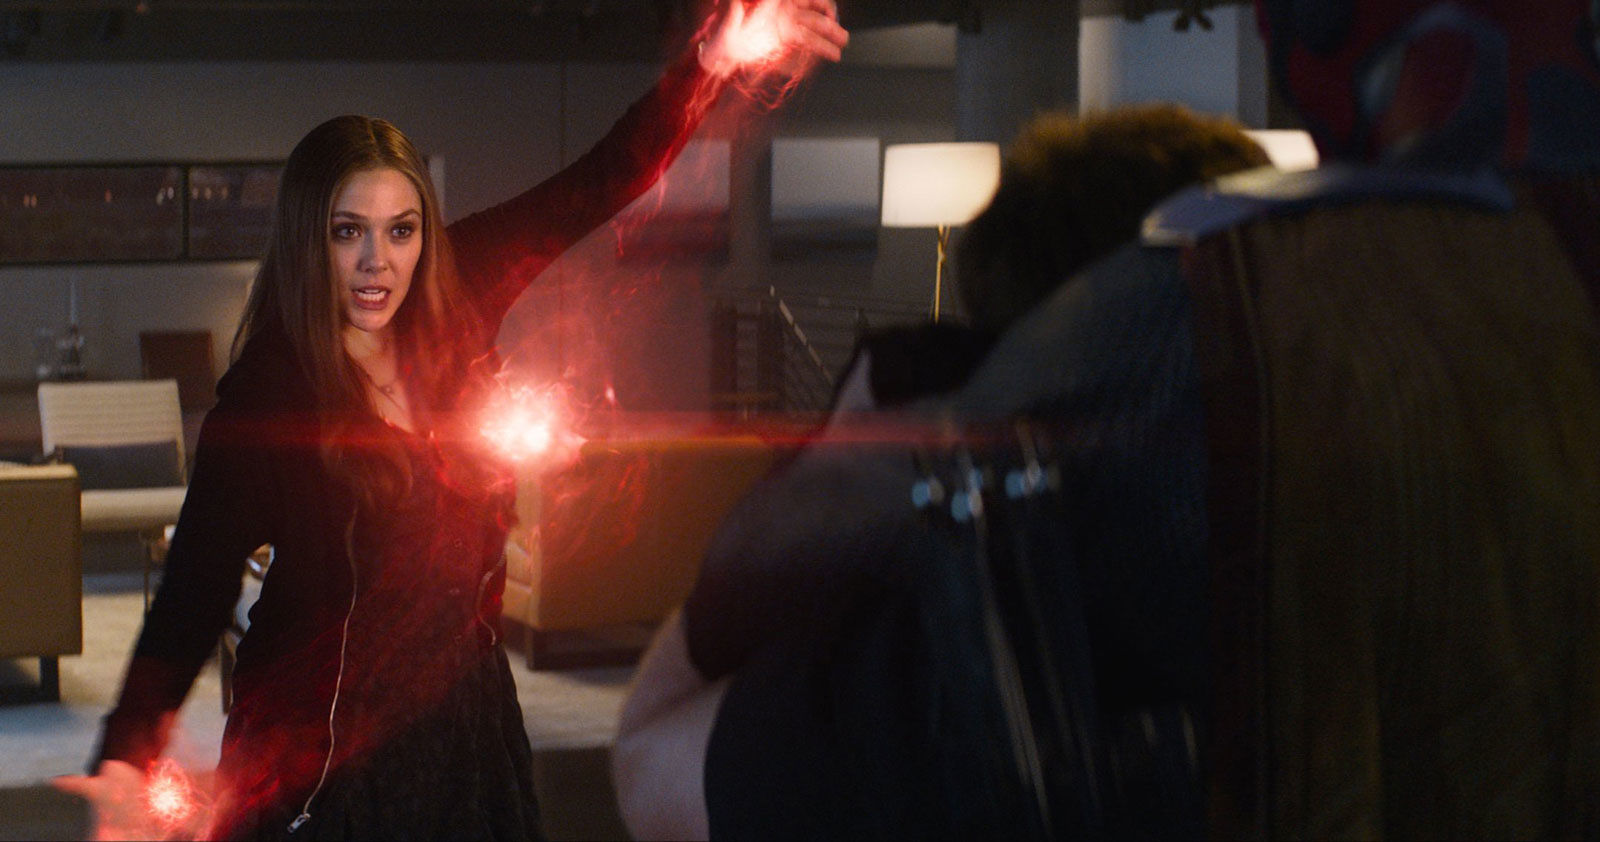 scarlet-witch-s-explosive-role-in-captain-america-civil-war-changed-the-mcu-forever-mi-954251